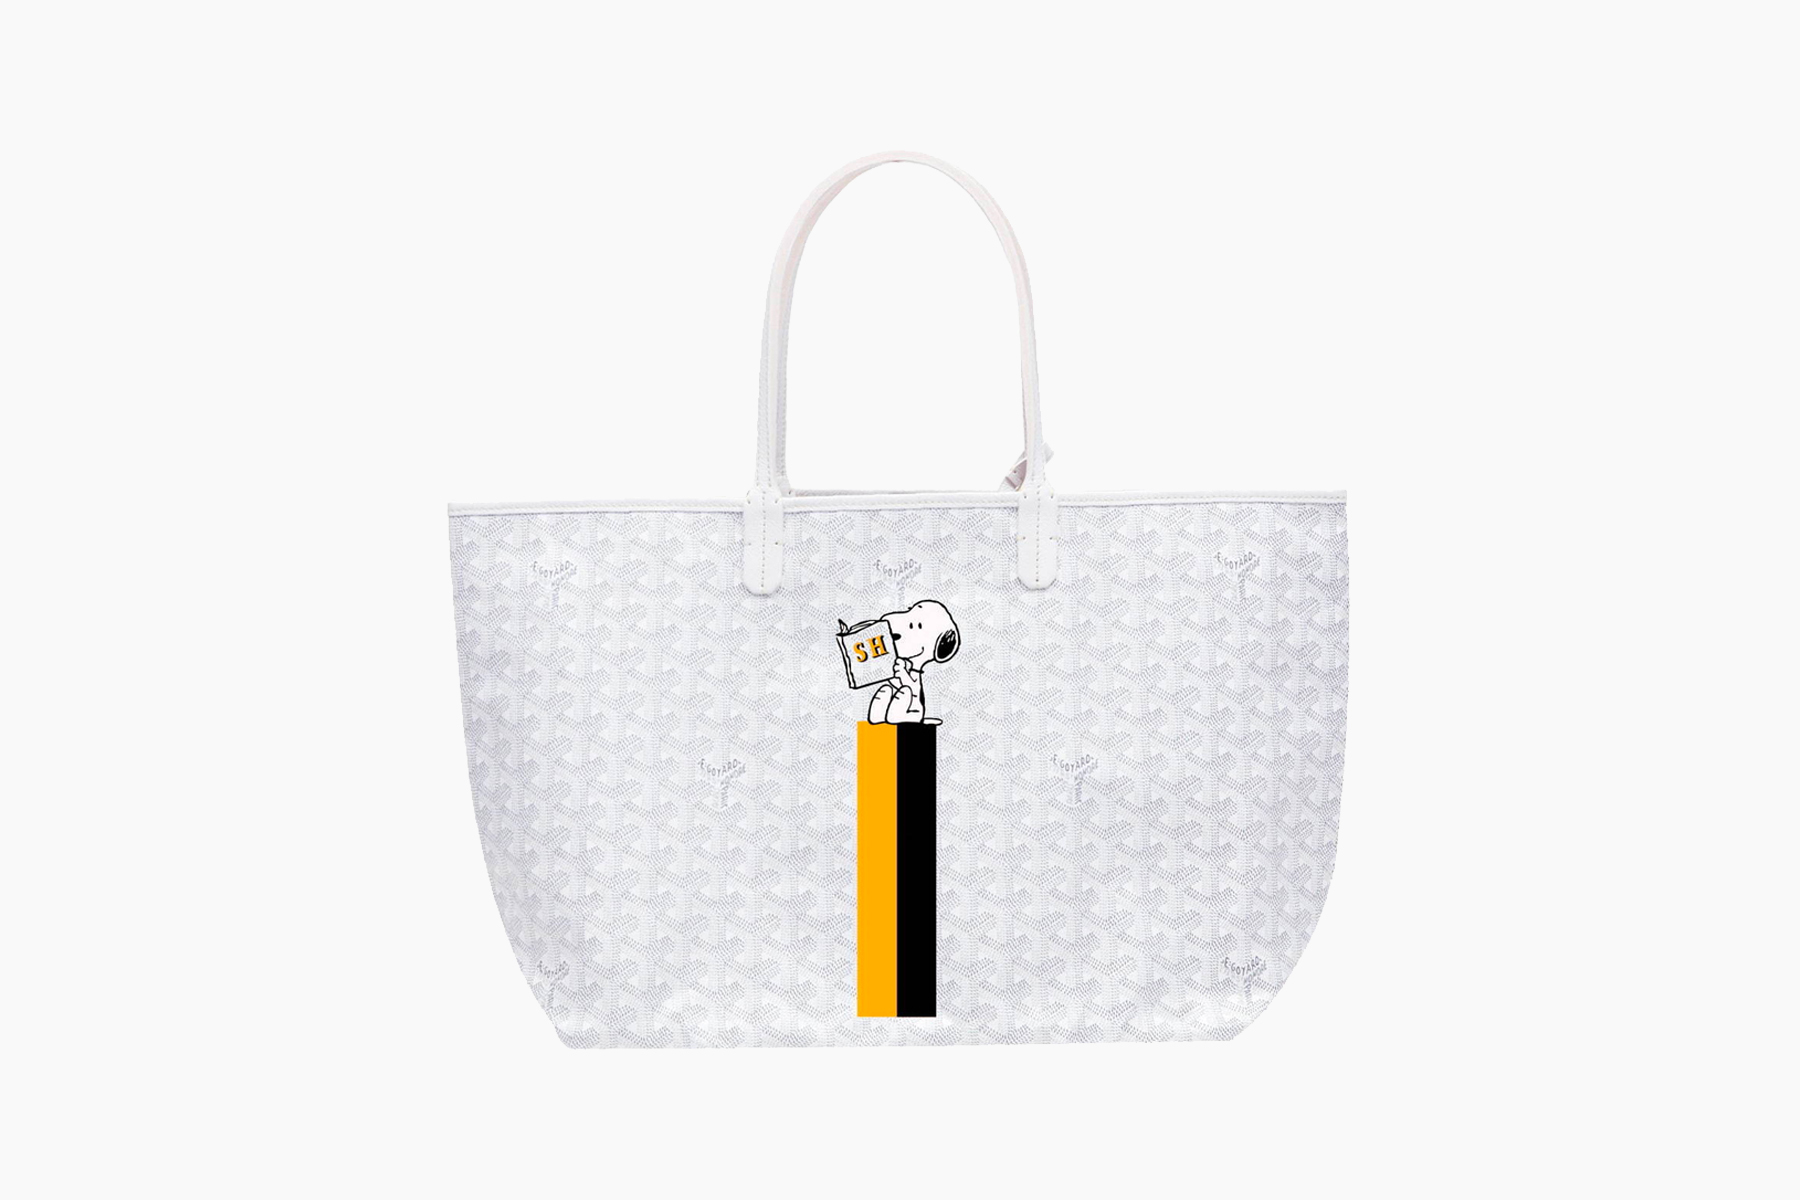 Goyard's Tote Bags & Wallets Receive Rare Snoopy Customizations